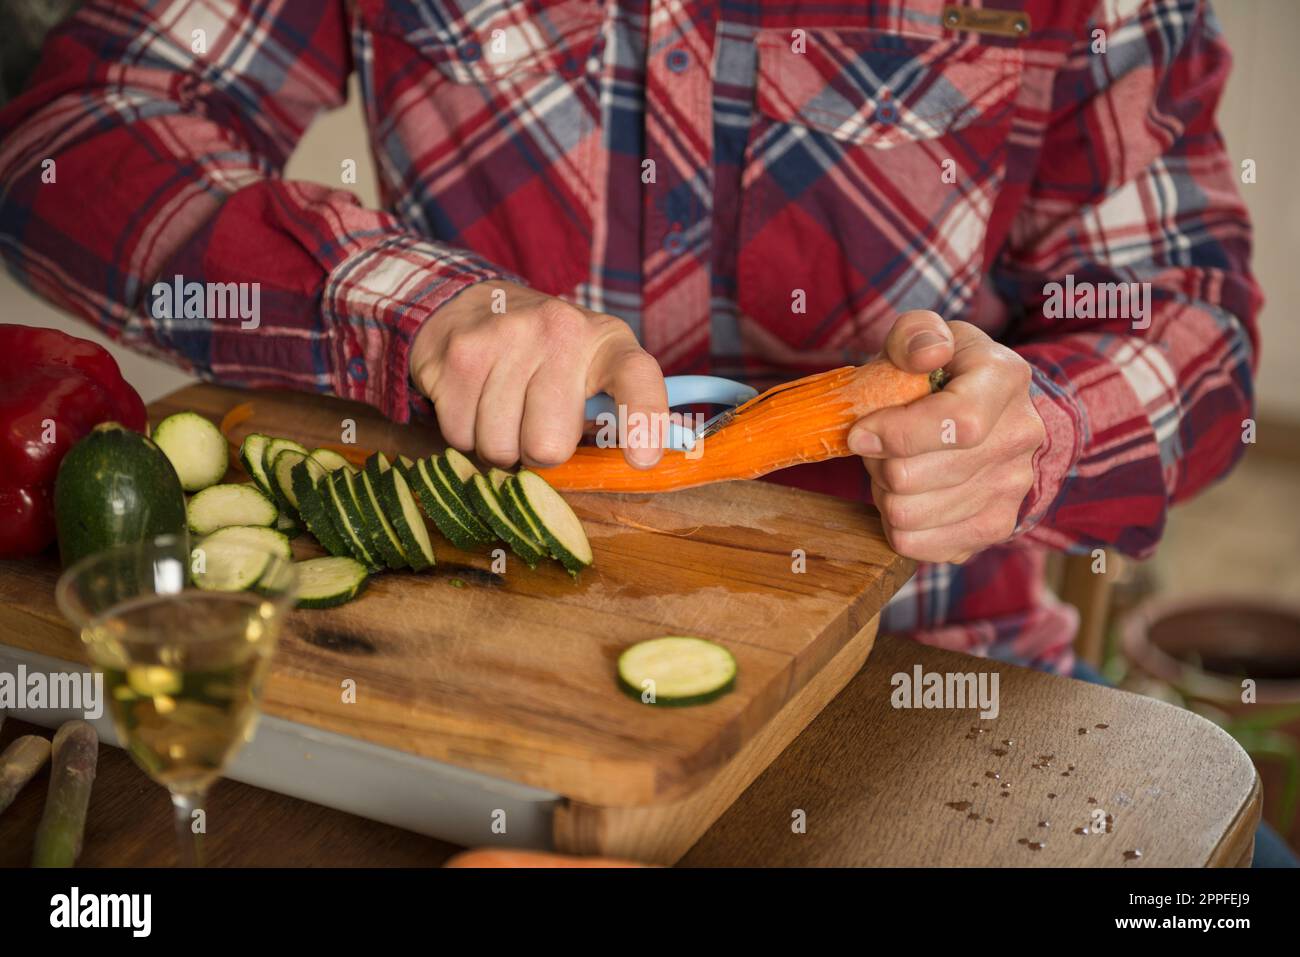 Midsection of a man peeling carrot on chopping board, Munich, Bavaria, Germany Stock Photo